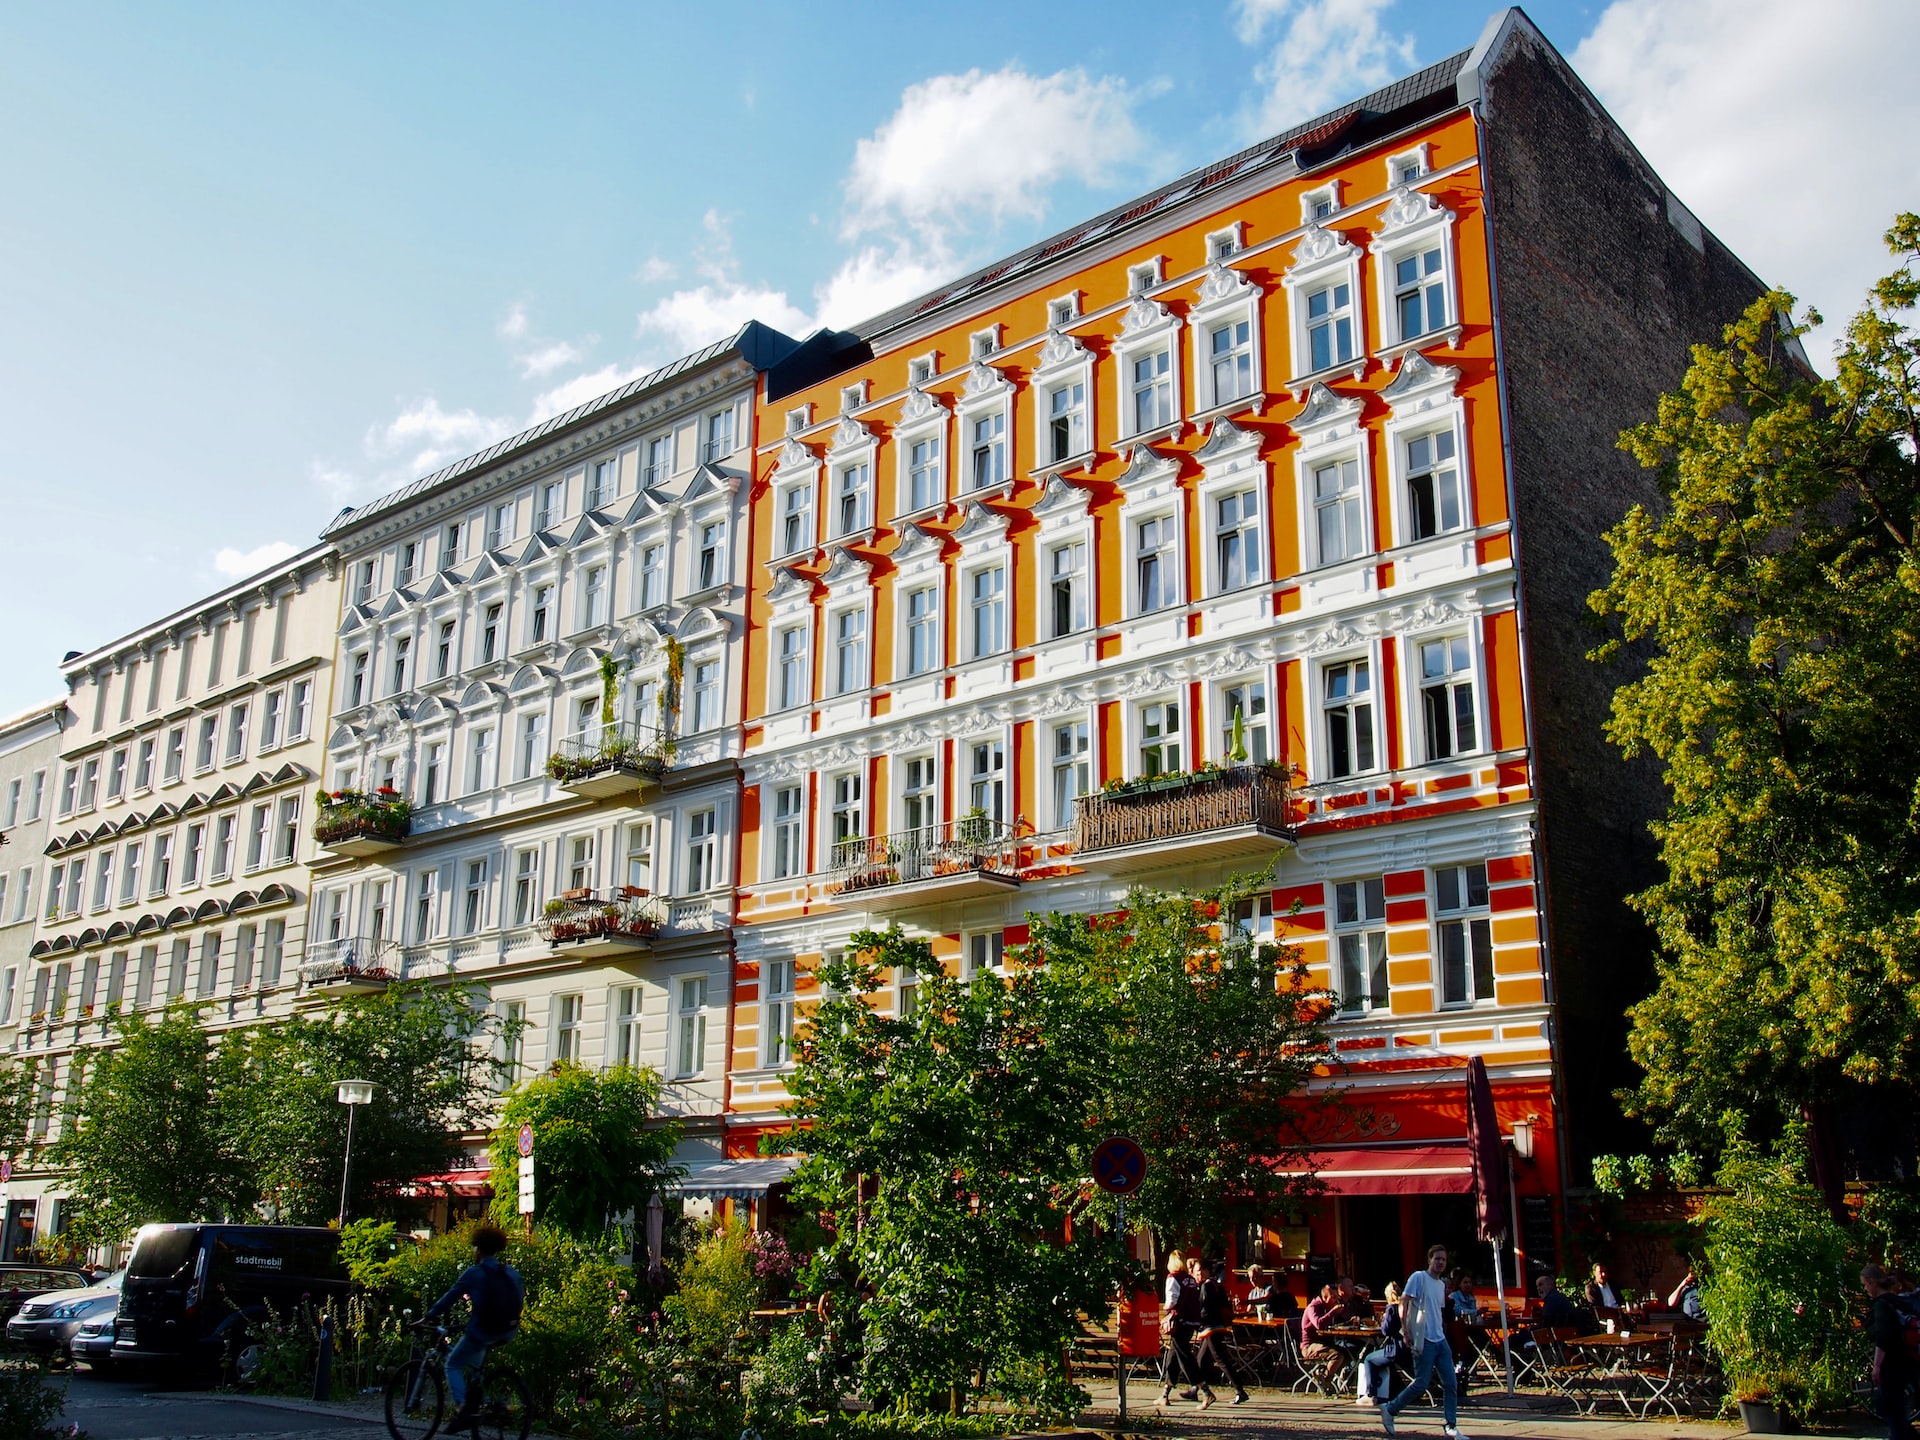 Berlin's hipster heart, Kreuzberg is a nightlife hub & one of the best areas to stay in Berlin for young party-goers.